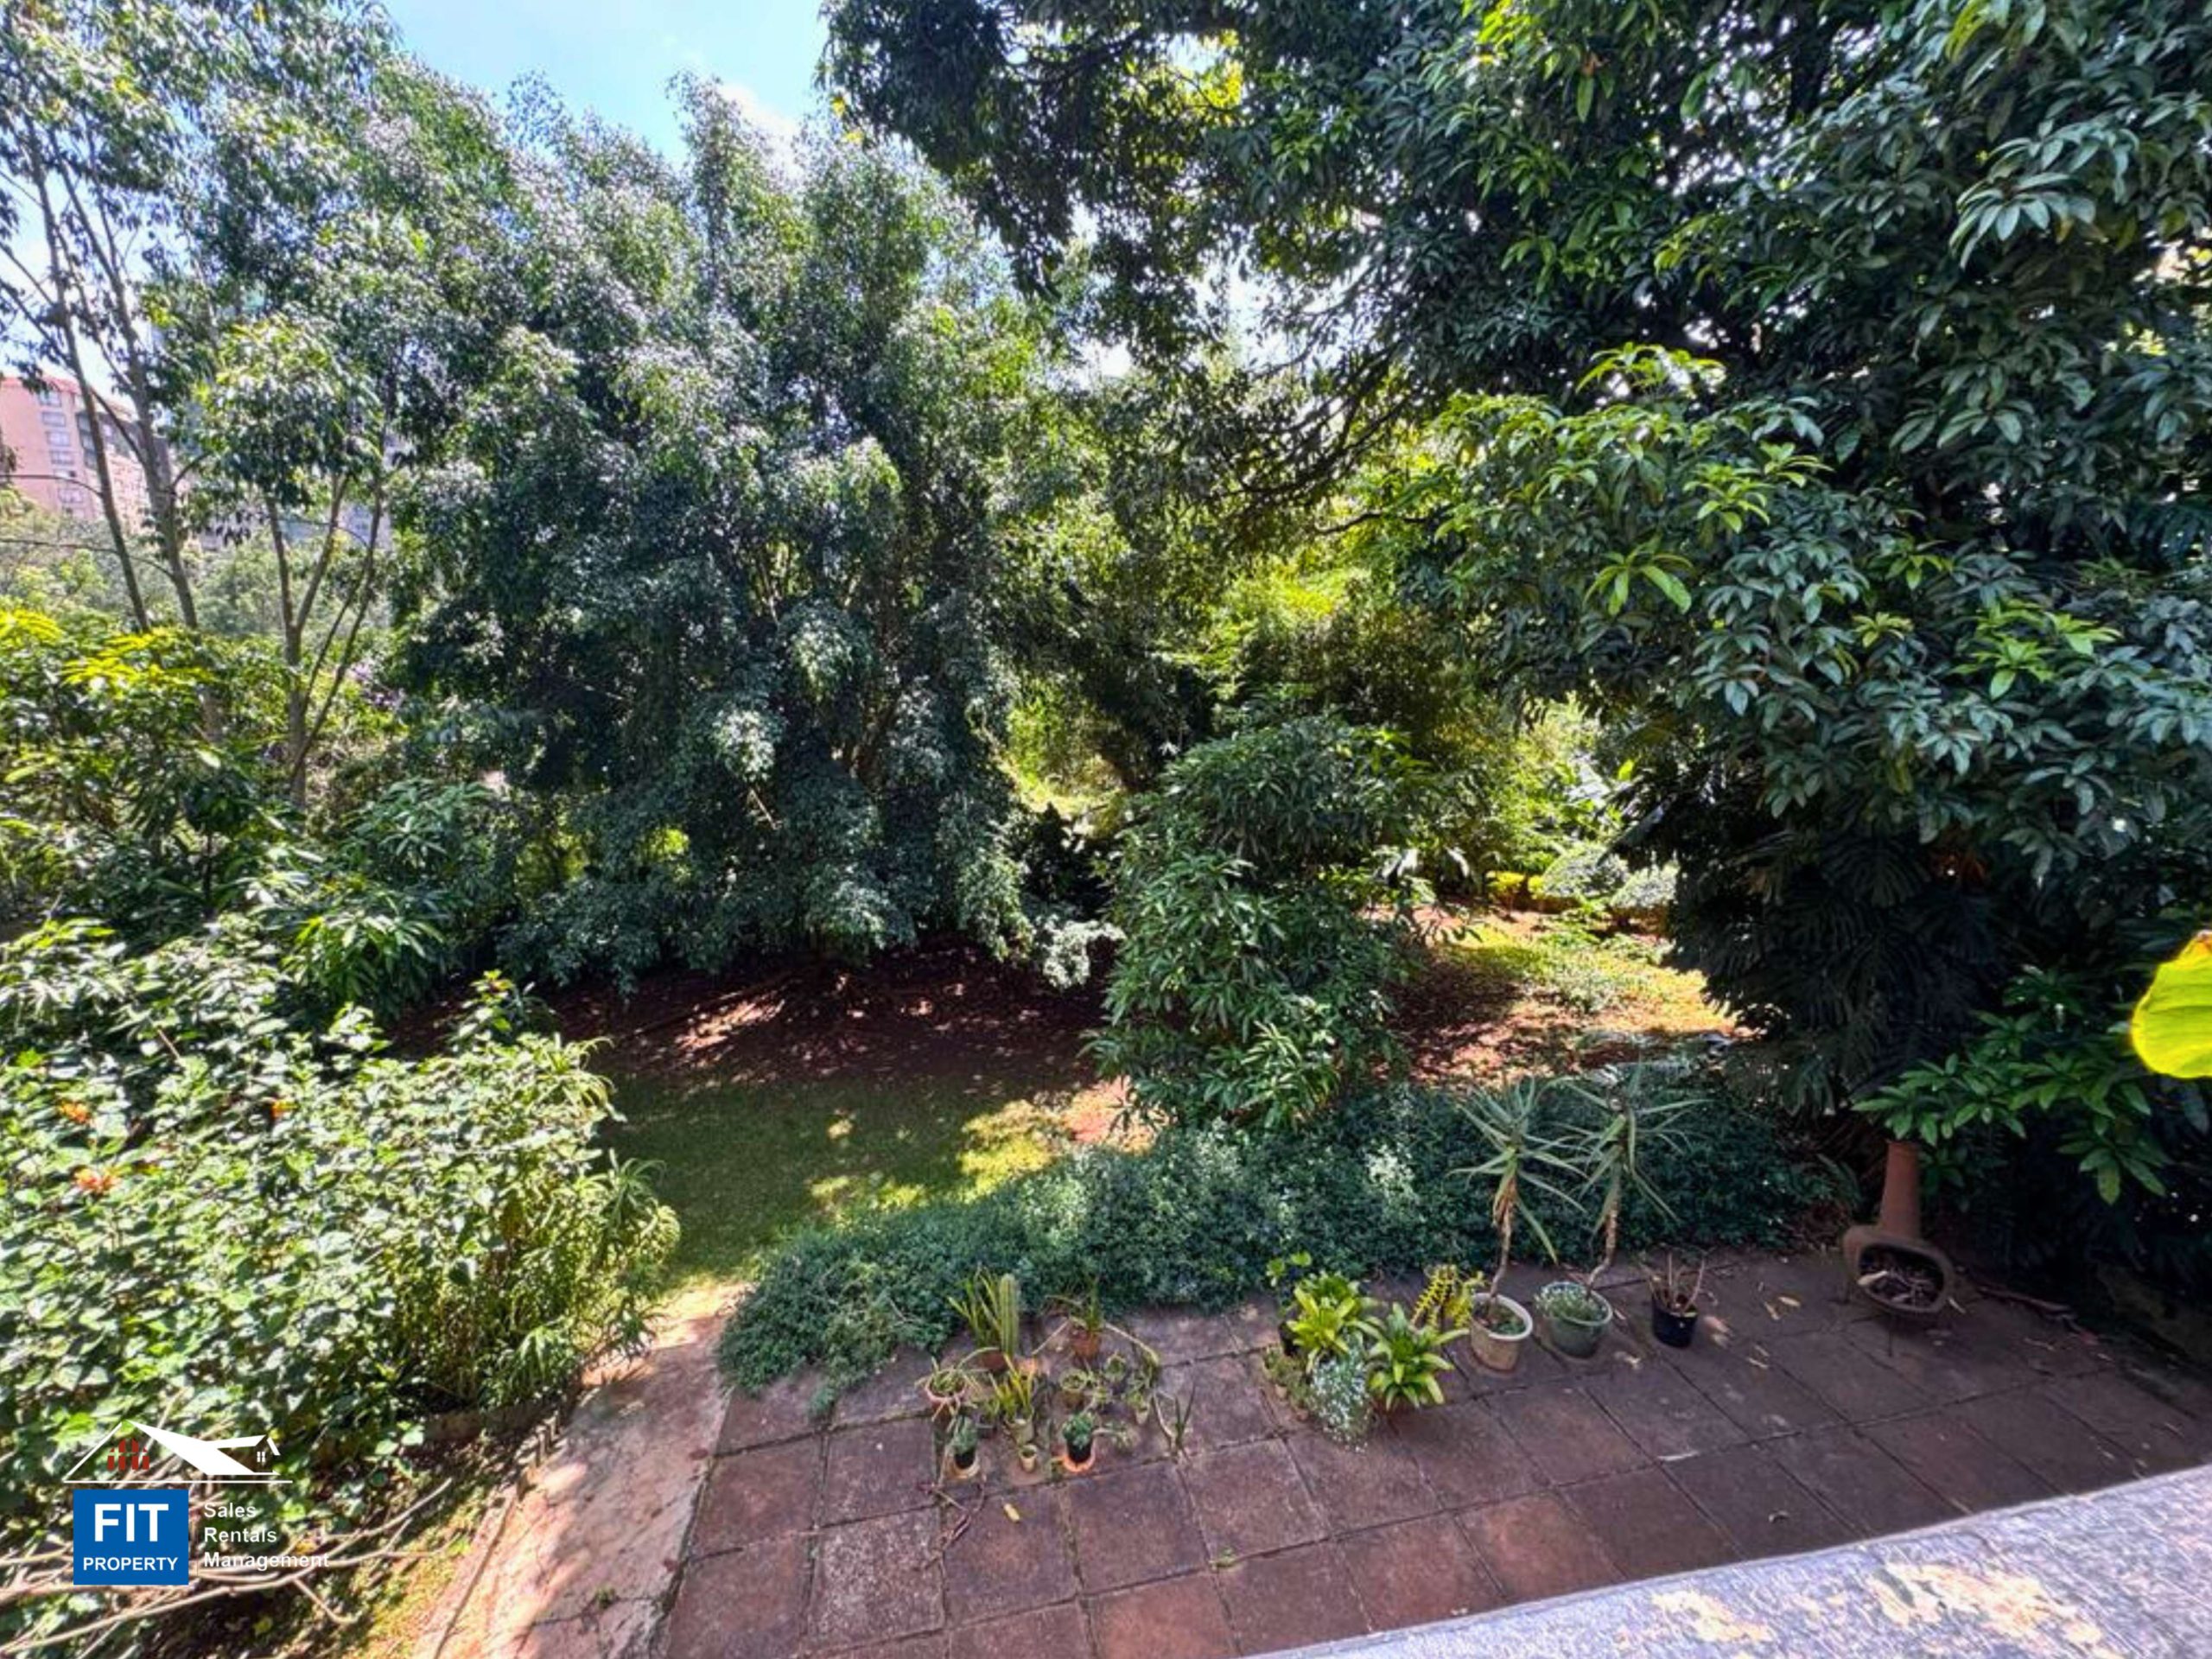 Exceptional 0.5 Acre Land Parcel in Spring Valley, Nairobi. Rectangular plot currently adorned with a charming three-bedroom bungalow. 100 Million FIT PROPERTY